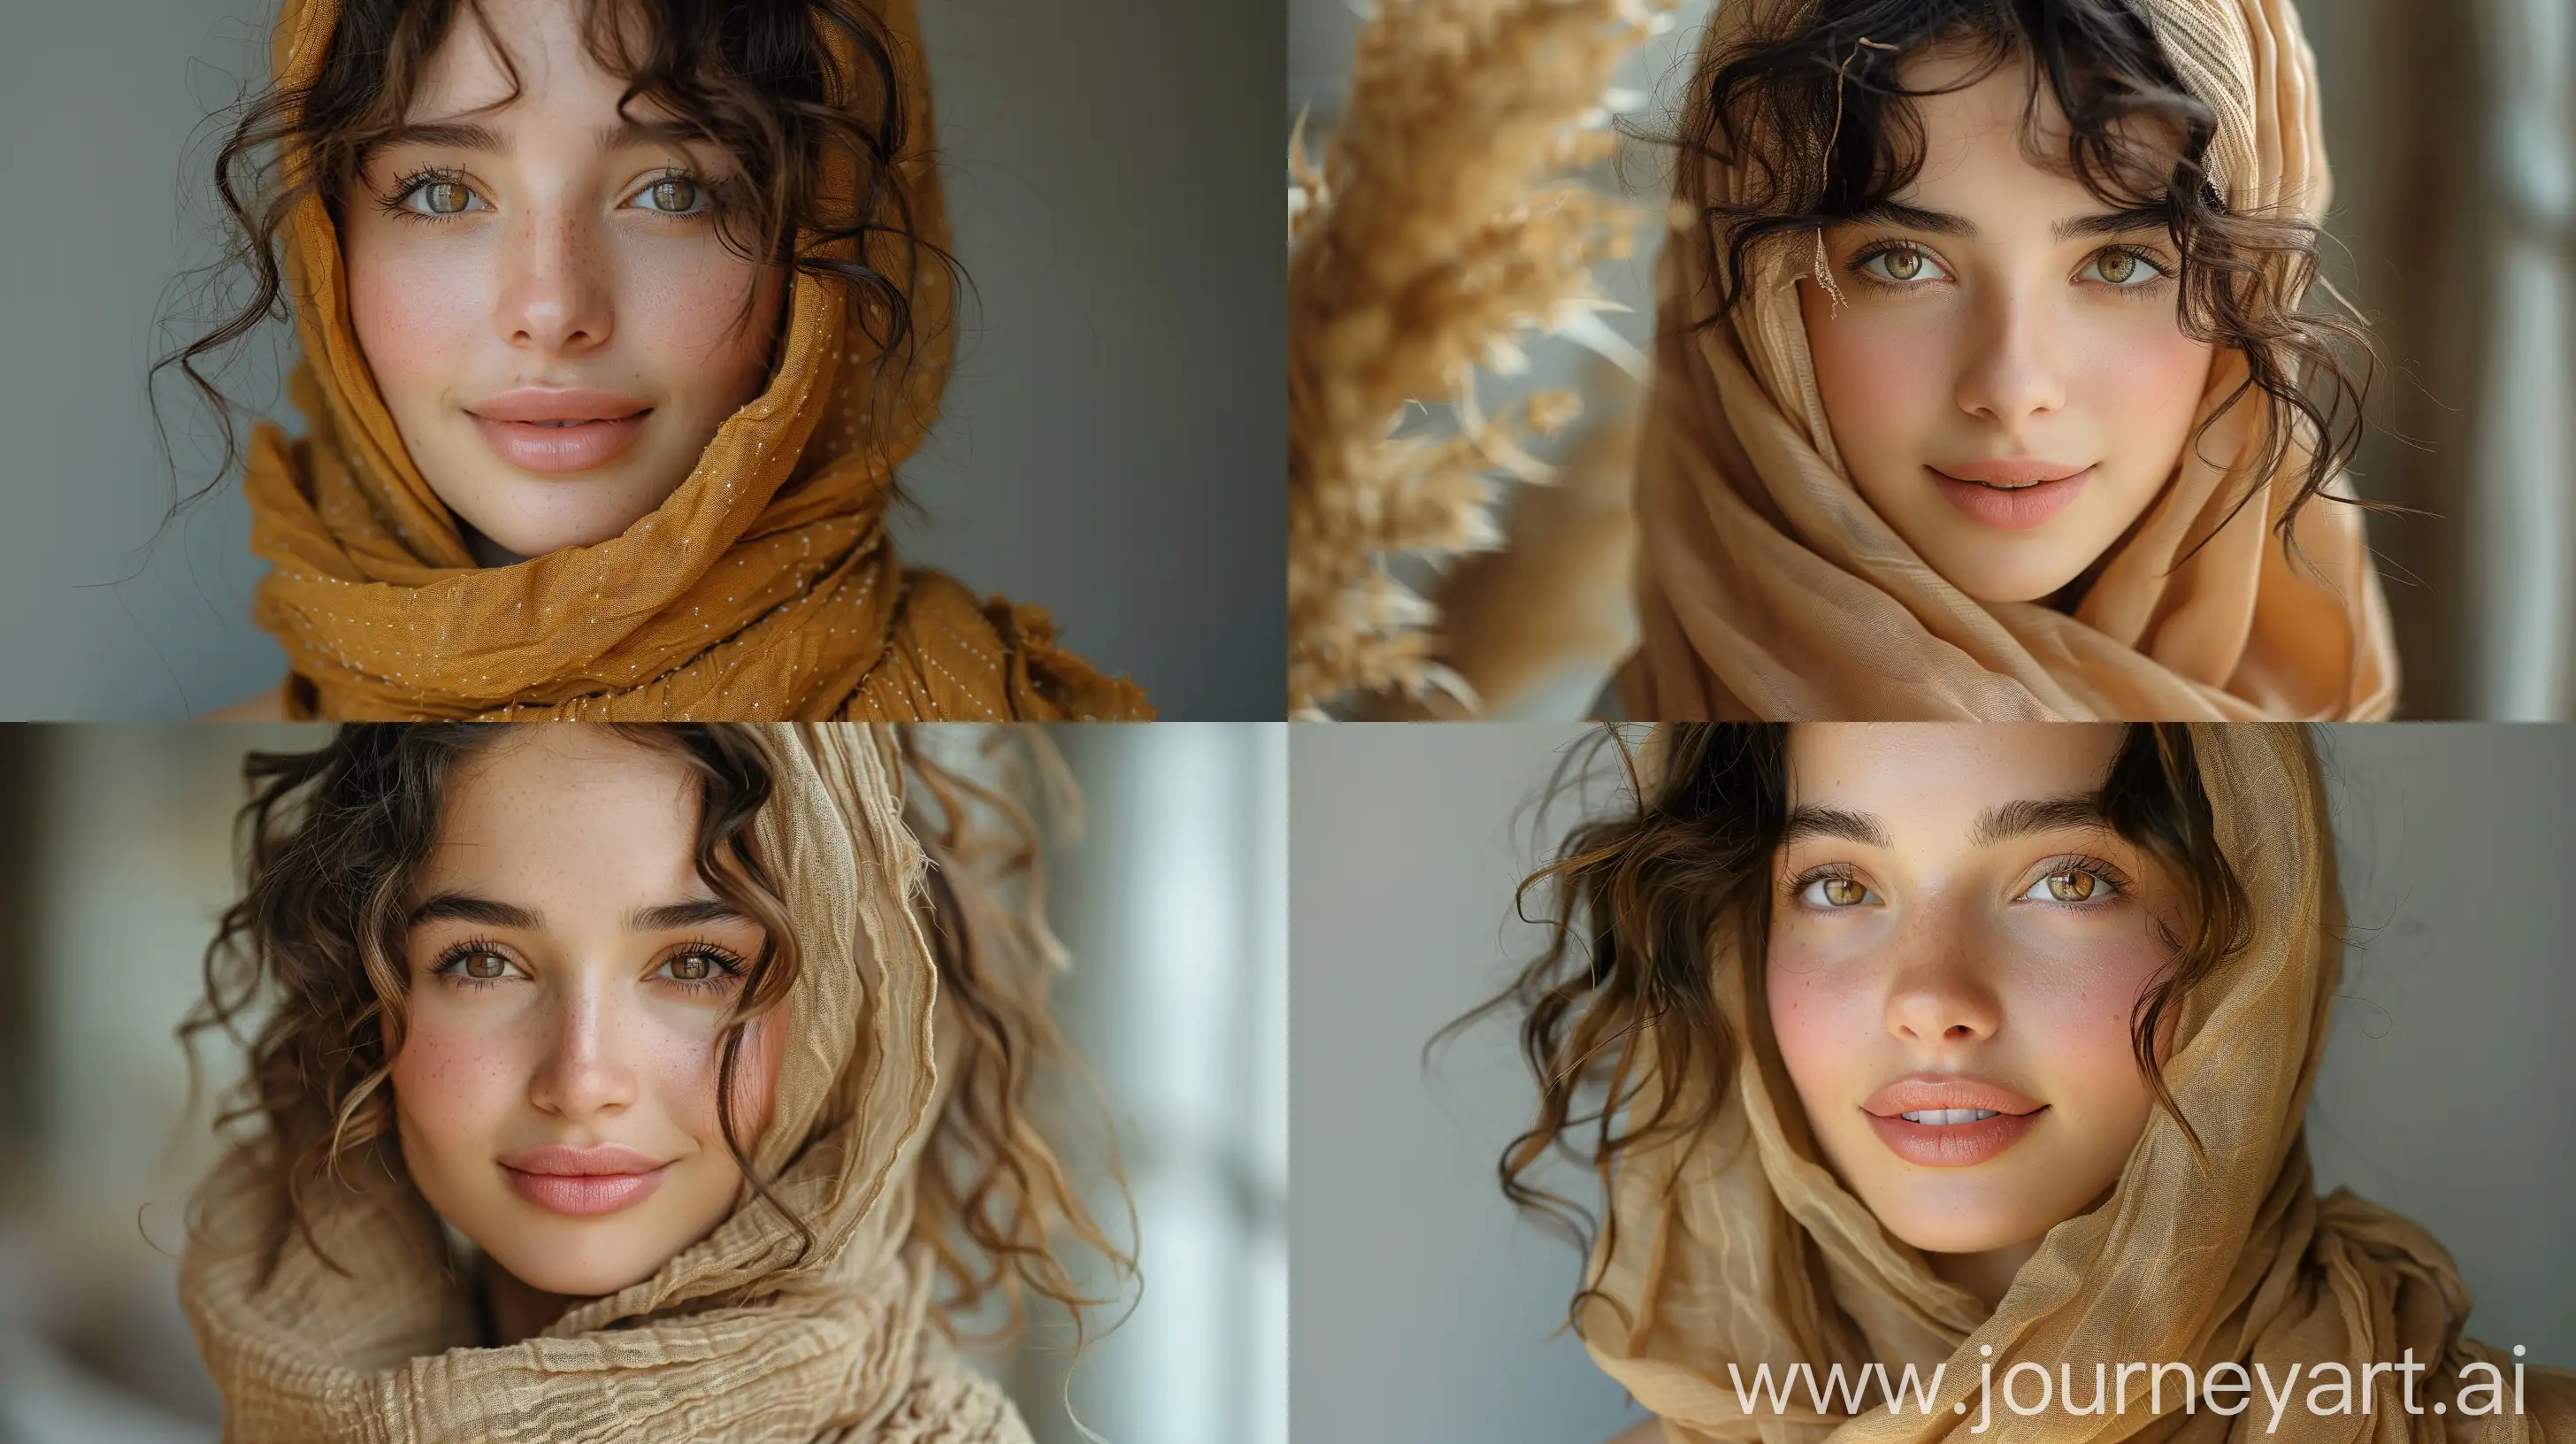 Happy-Iranian-Woman-in-Hijab-with-Curly-Hair-Smiling-Innocently